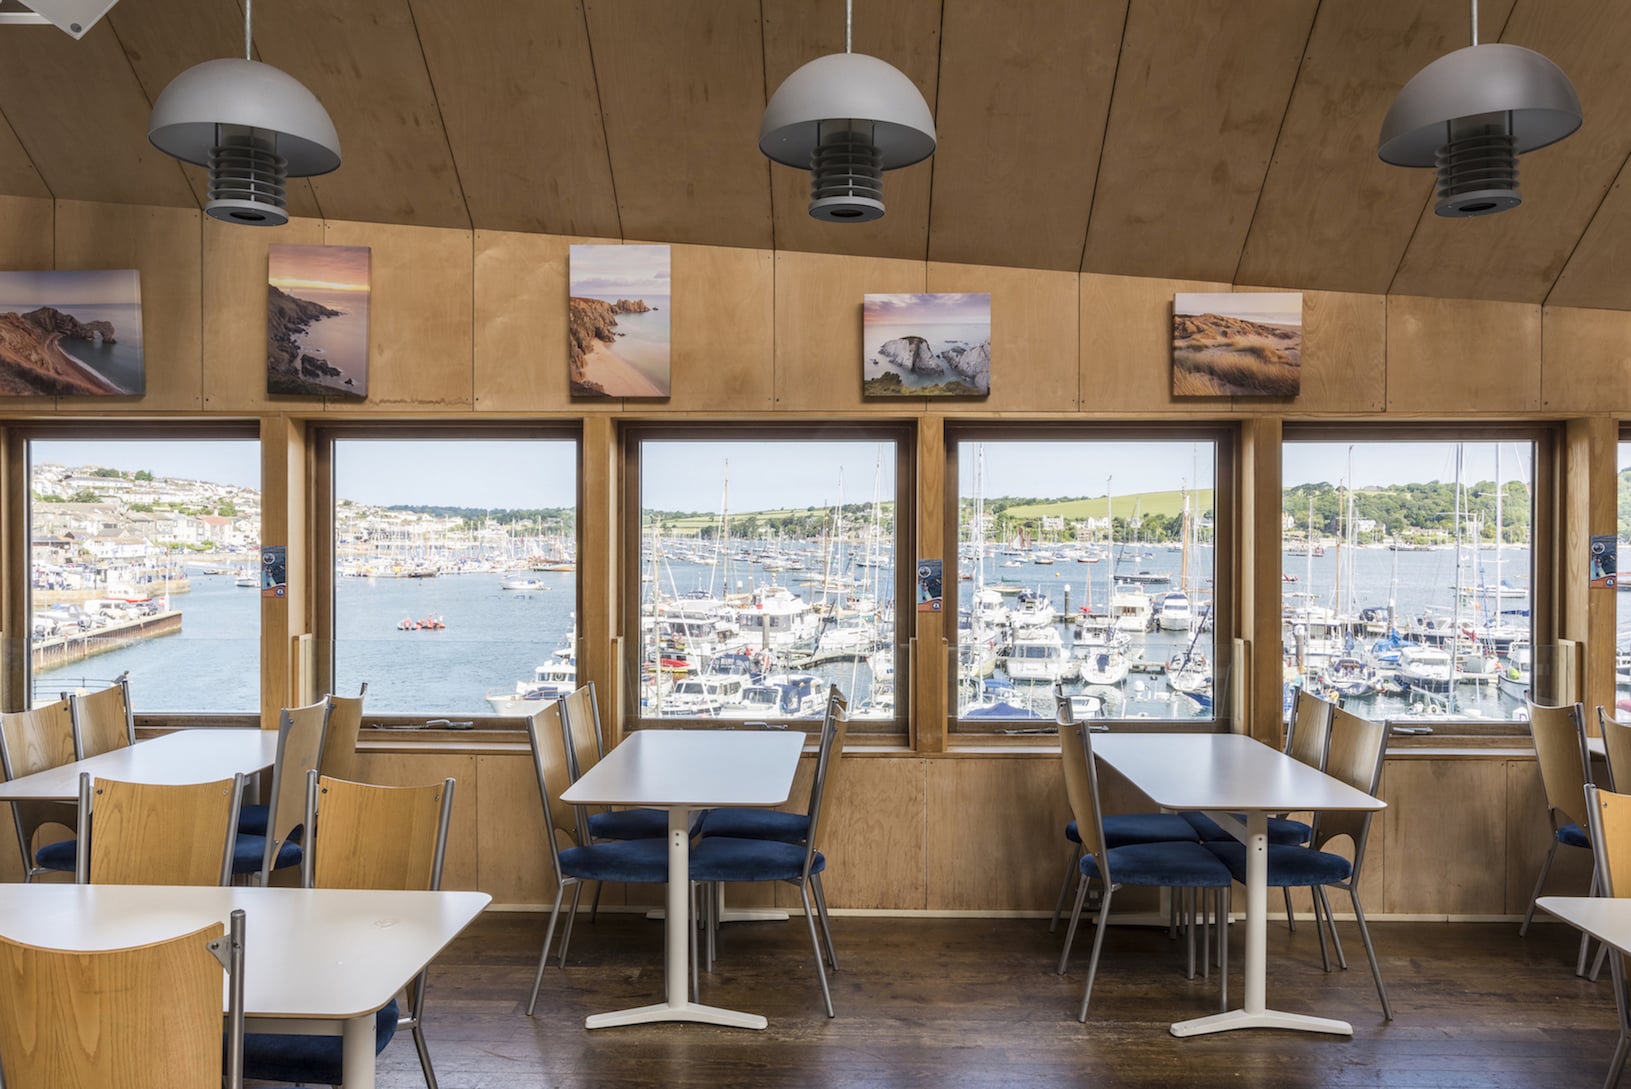 The Waterside Cafe at The National Maritime Museum Cornwall in Falmouth